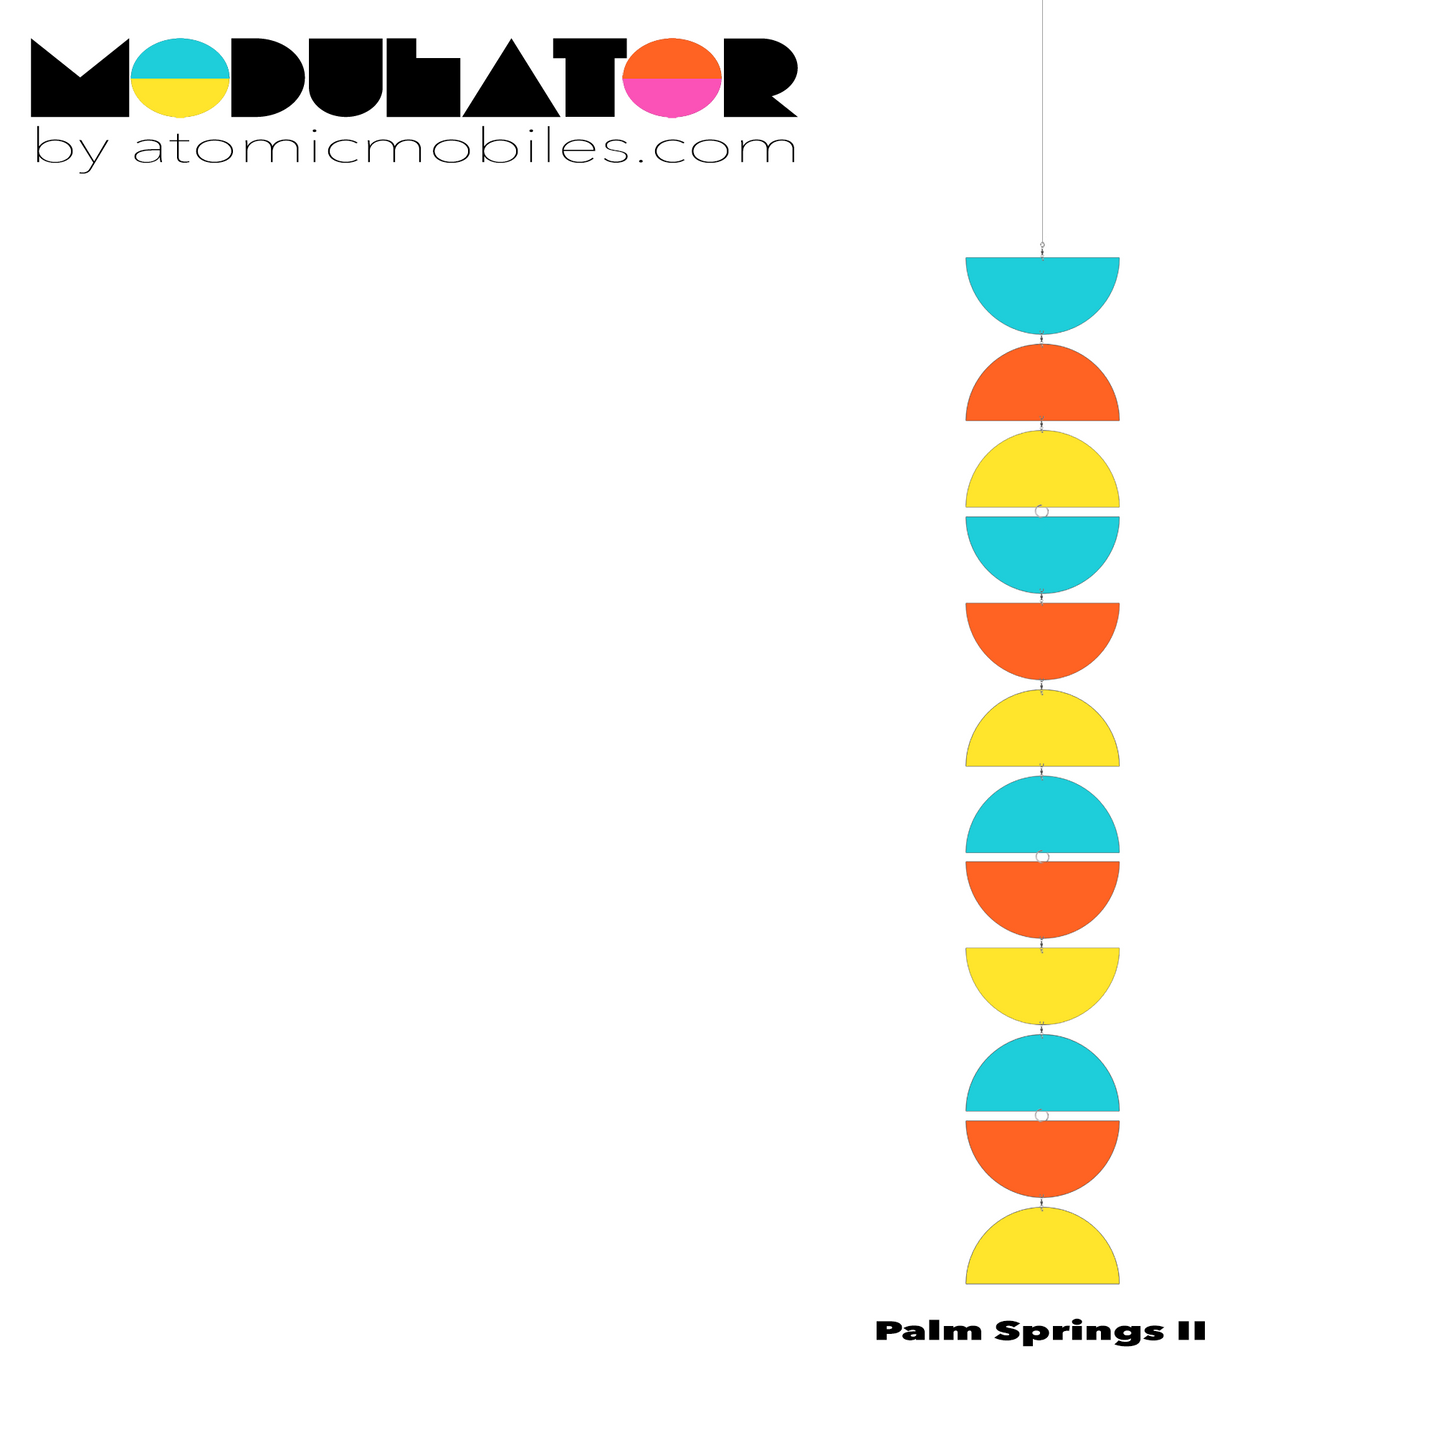 MODulator Vertical Art Mobile - retro mid century modern style hanging art mobile in Palm Springs II Colors of Aqua, Orange, and Yellow by AtomicMobiles.com